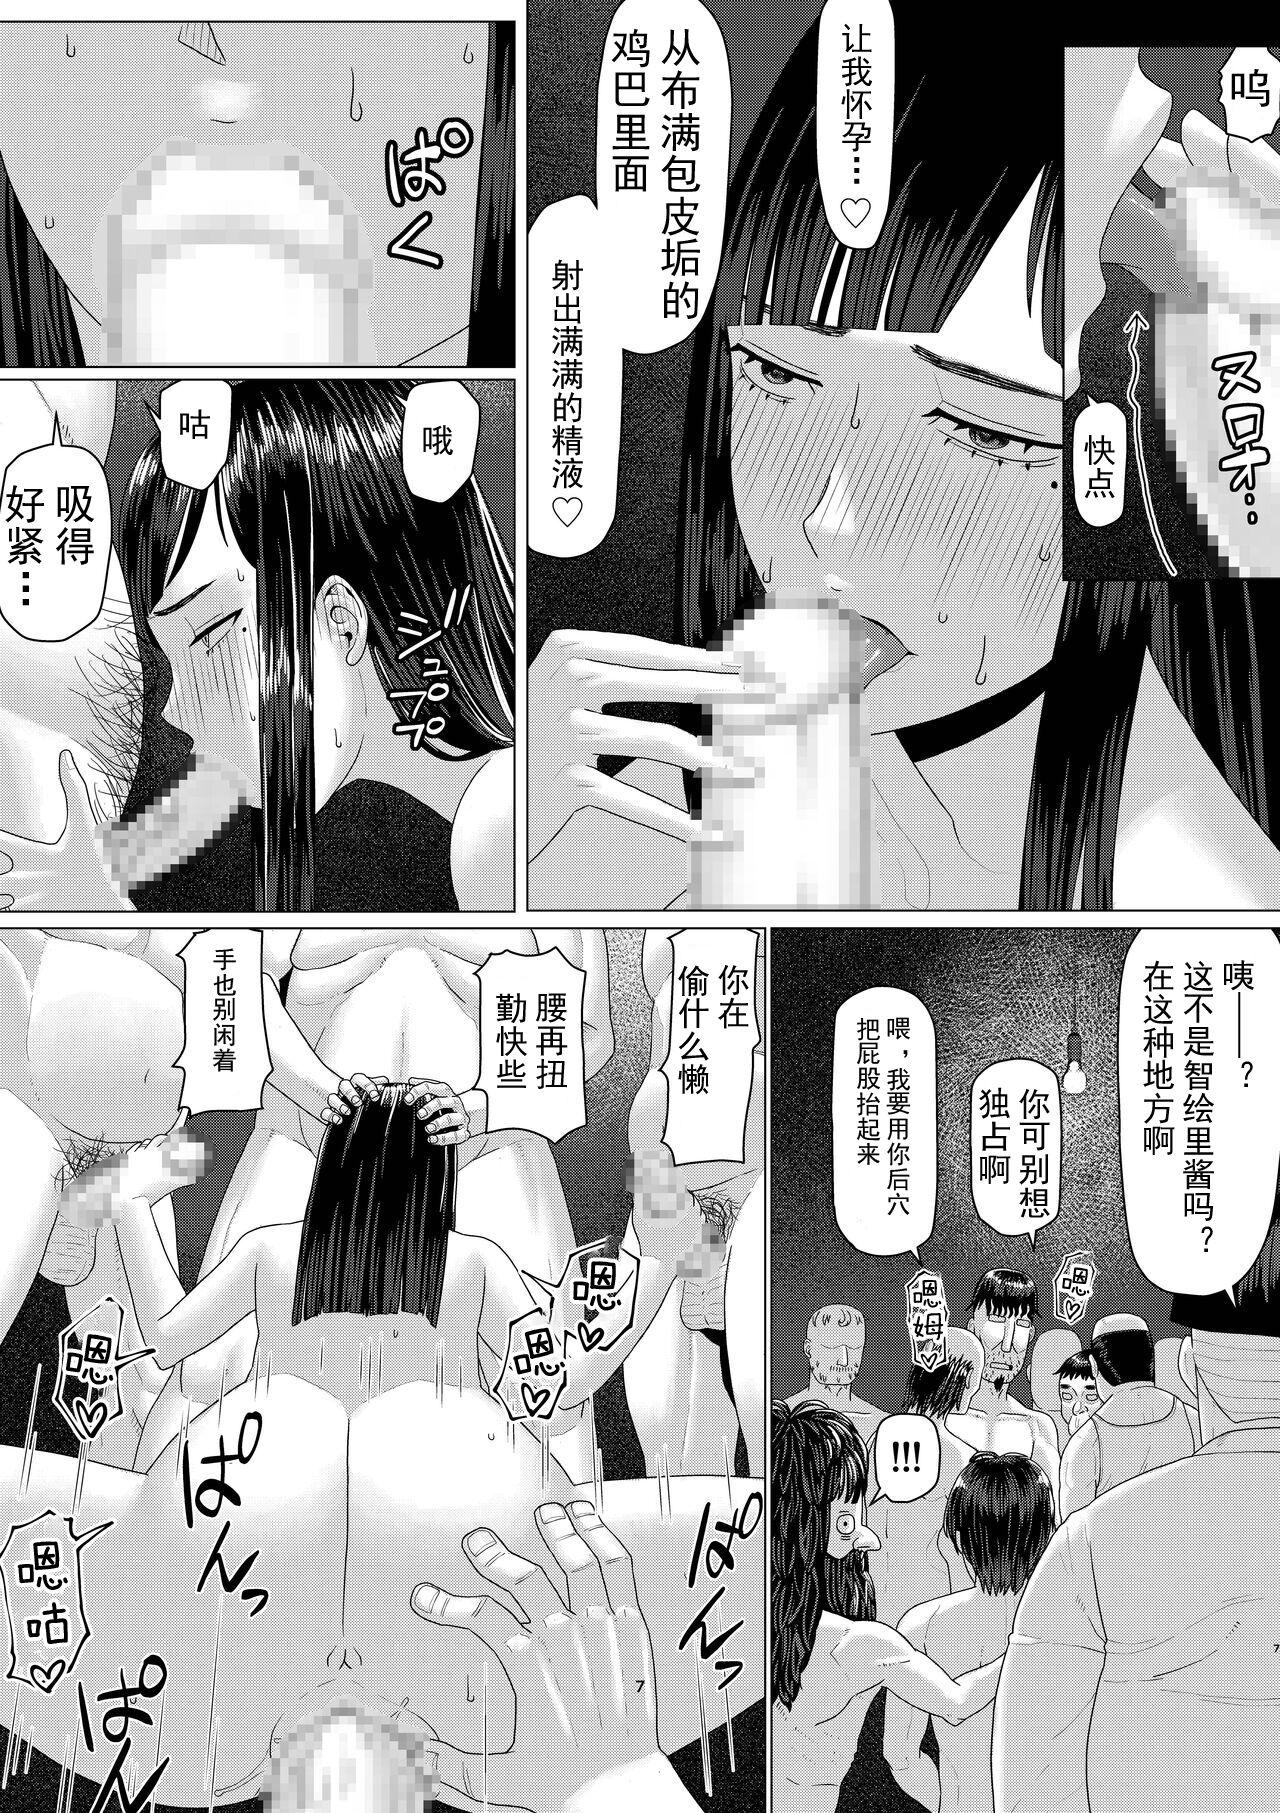 Wet Cunts Chieri can't lose! 3 -Perverted toilet wife who fertilizes anyone's sperm with her husband's official approval- Volume 2 [Chinese] [超勇漢化組] - Original Redbone - Page 8